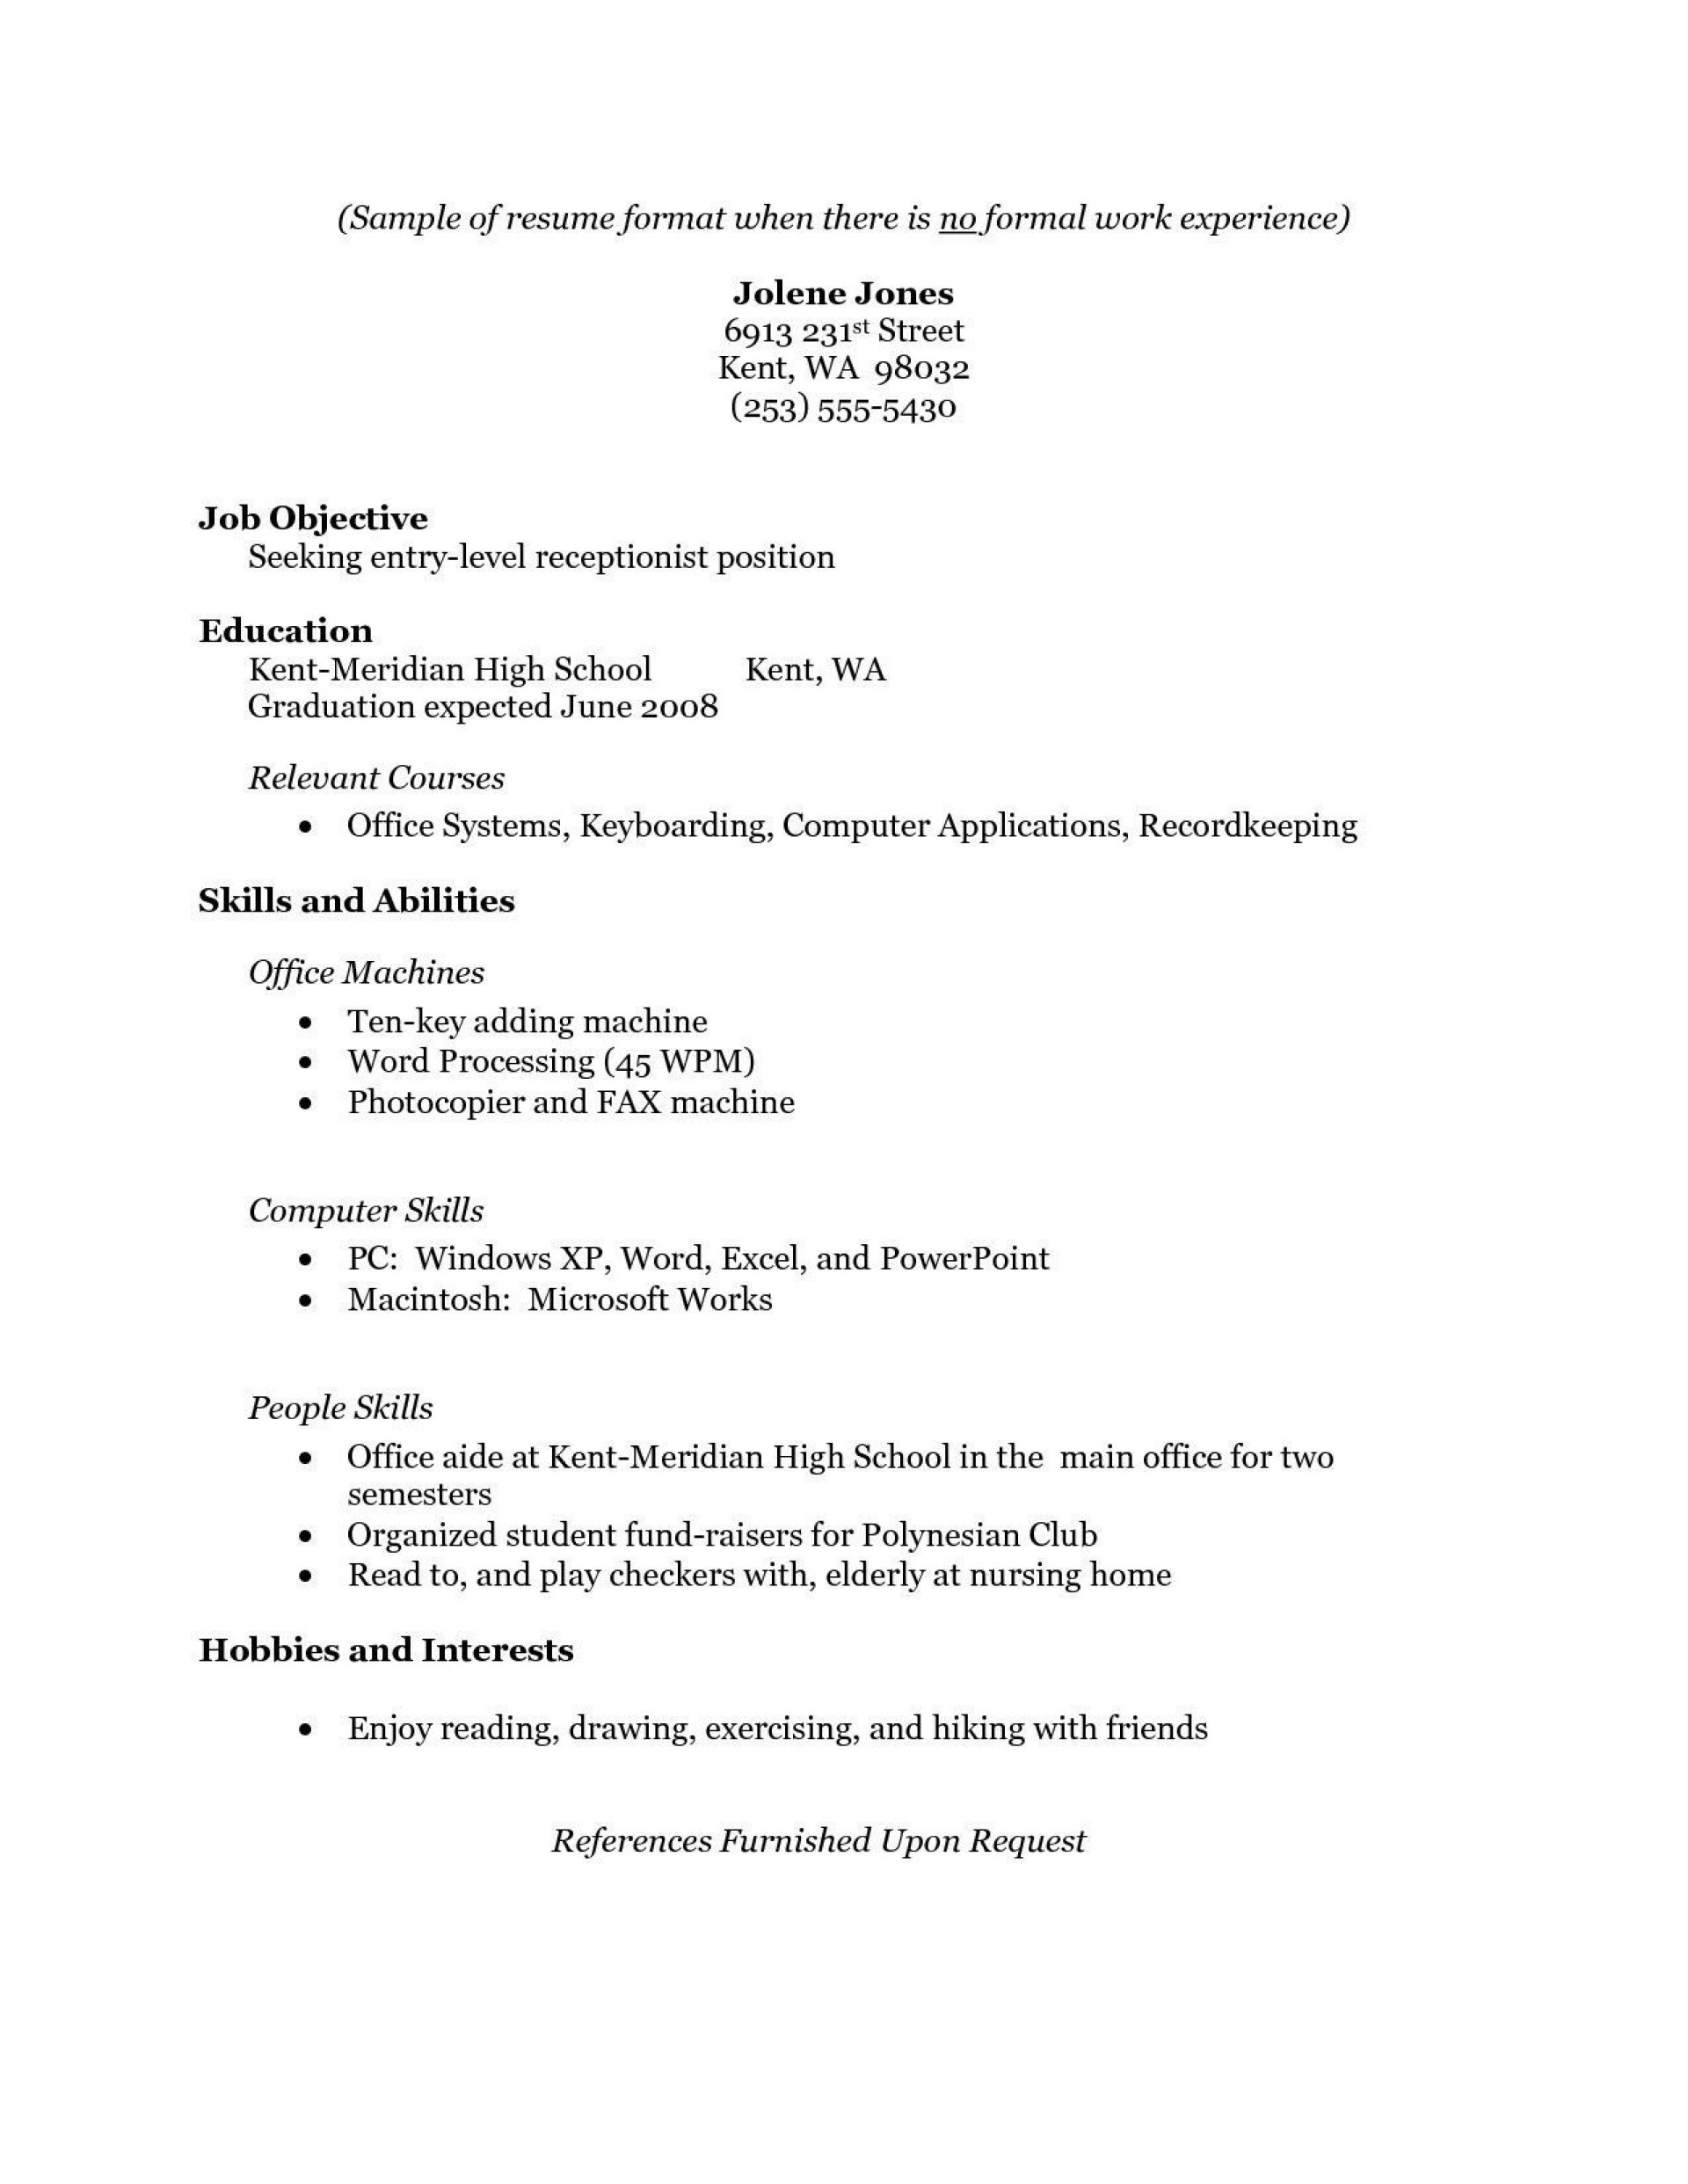 Resume Template for First Job Teenager Resume for Teenager First Job : Essential Student Resume Examples …